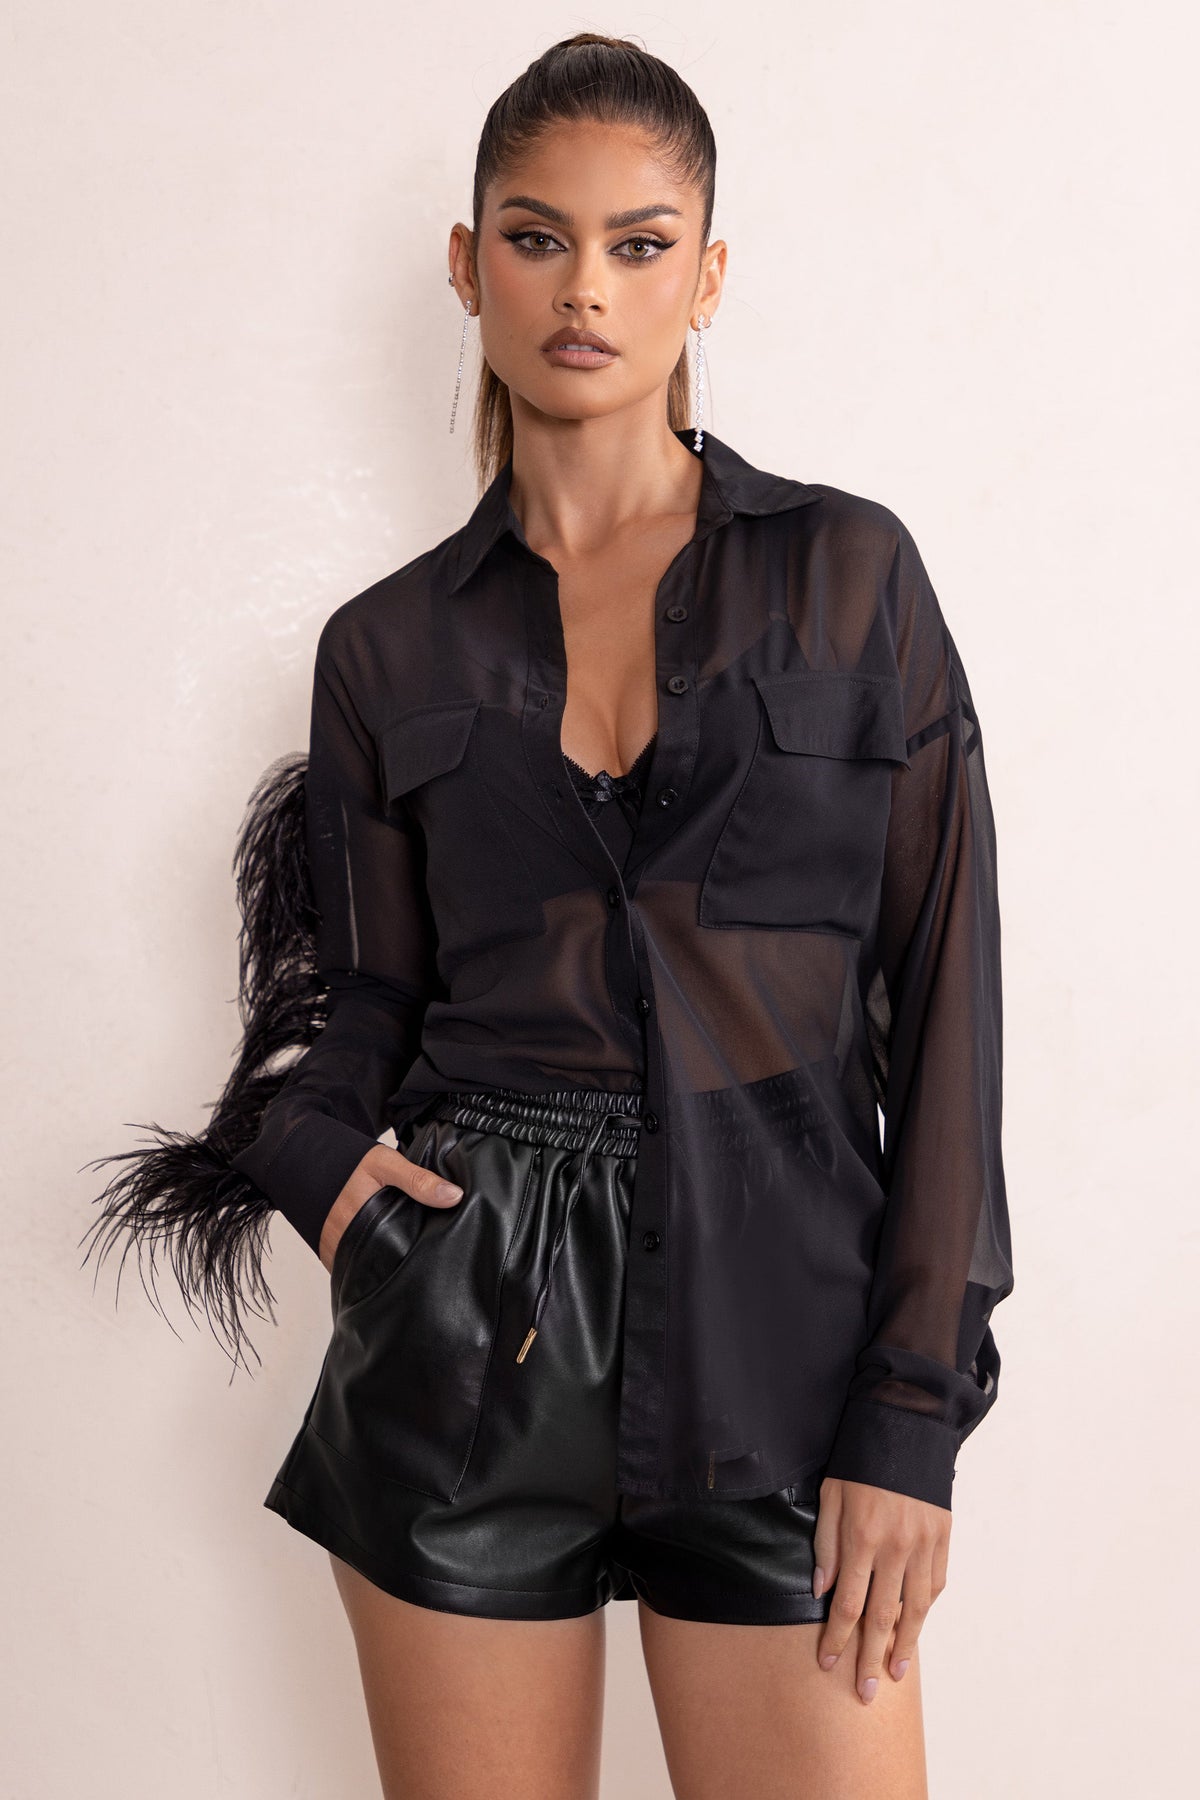 Loosen Up Black Plunge Neck Utility Pockets Shirt With Feather